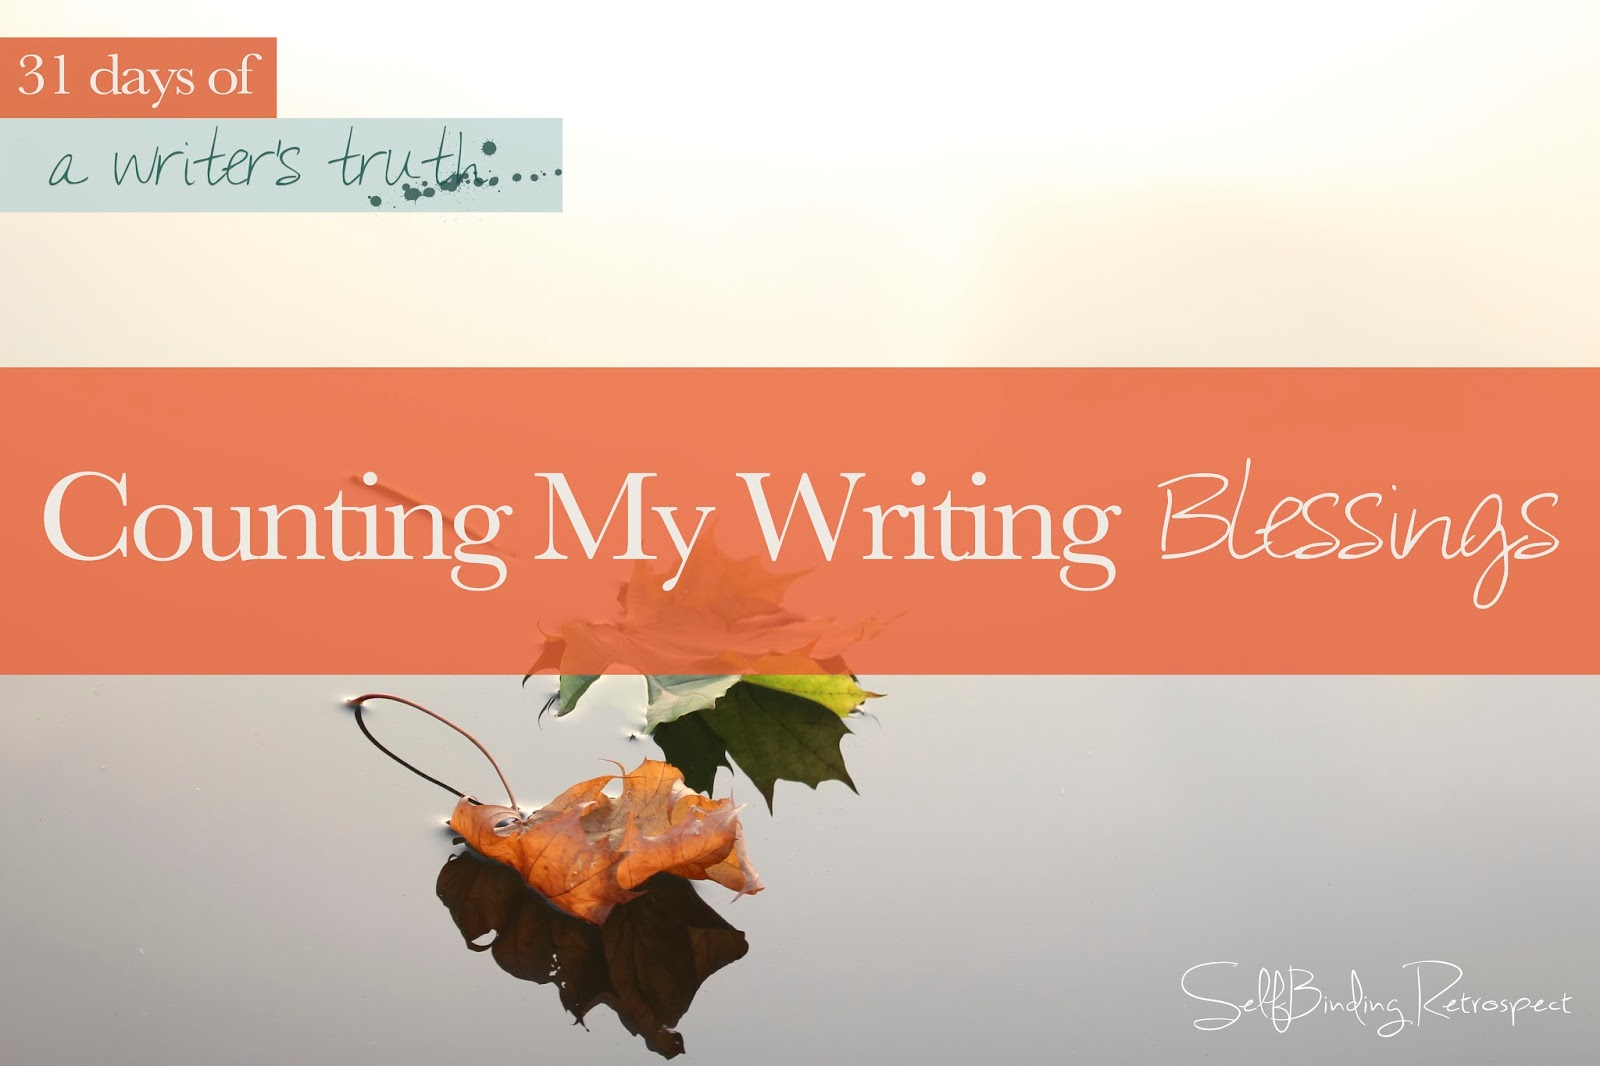 Counting my writing blessings #write31days